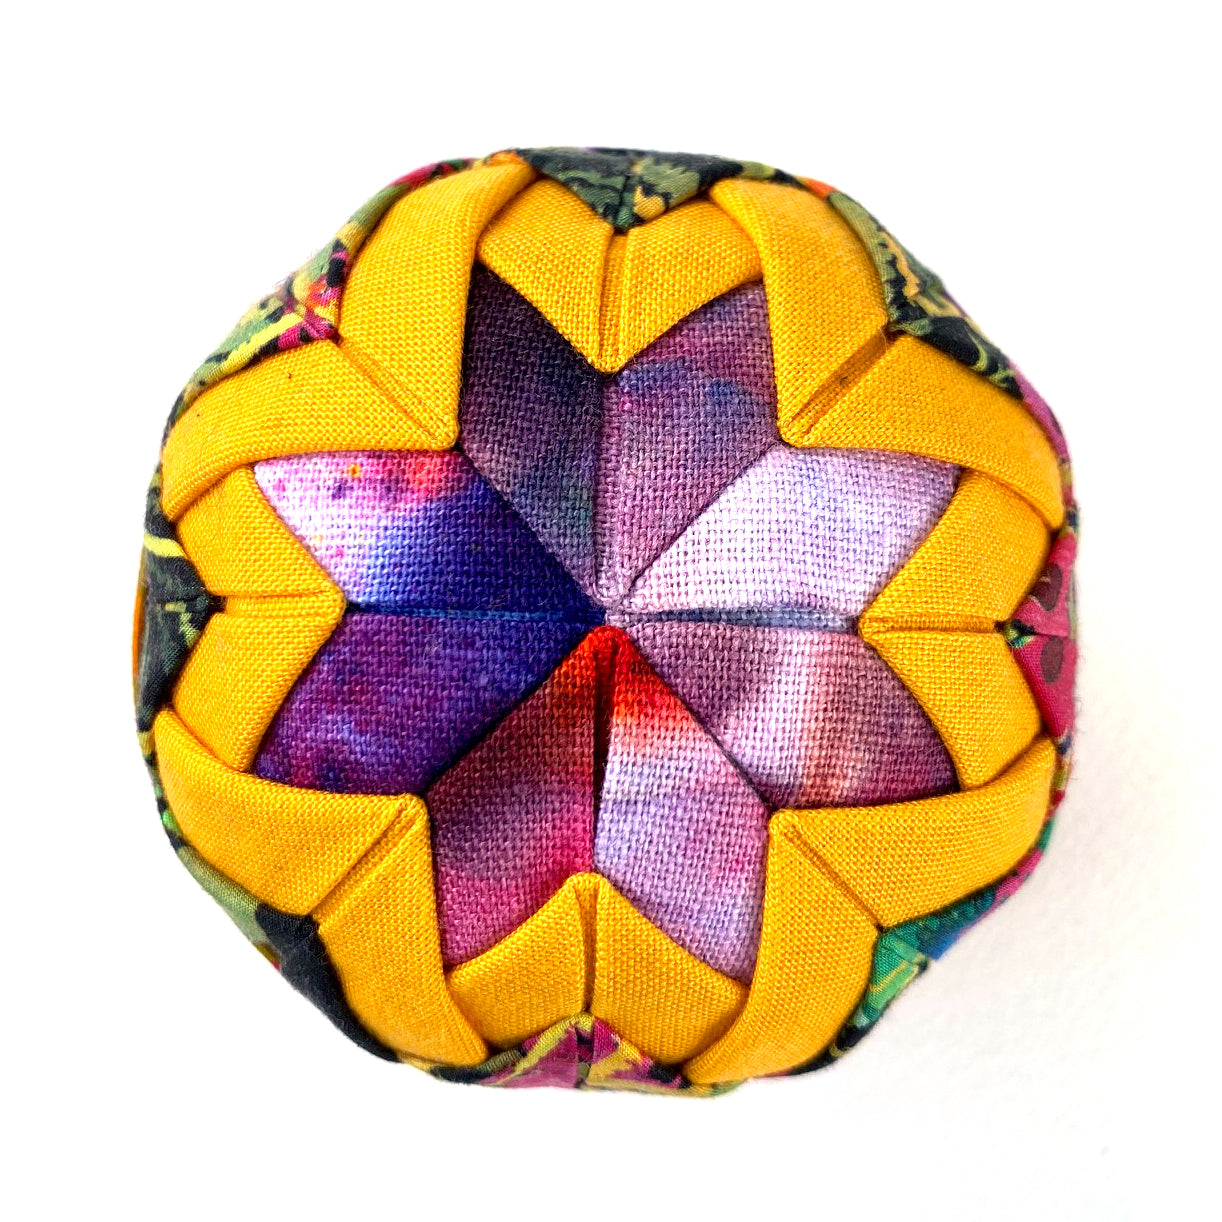 Book Your Own Private Quilted Ball Workshop